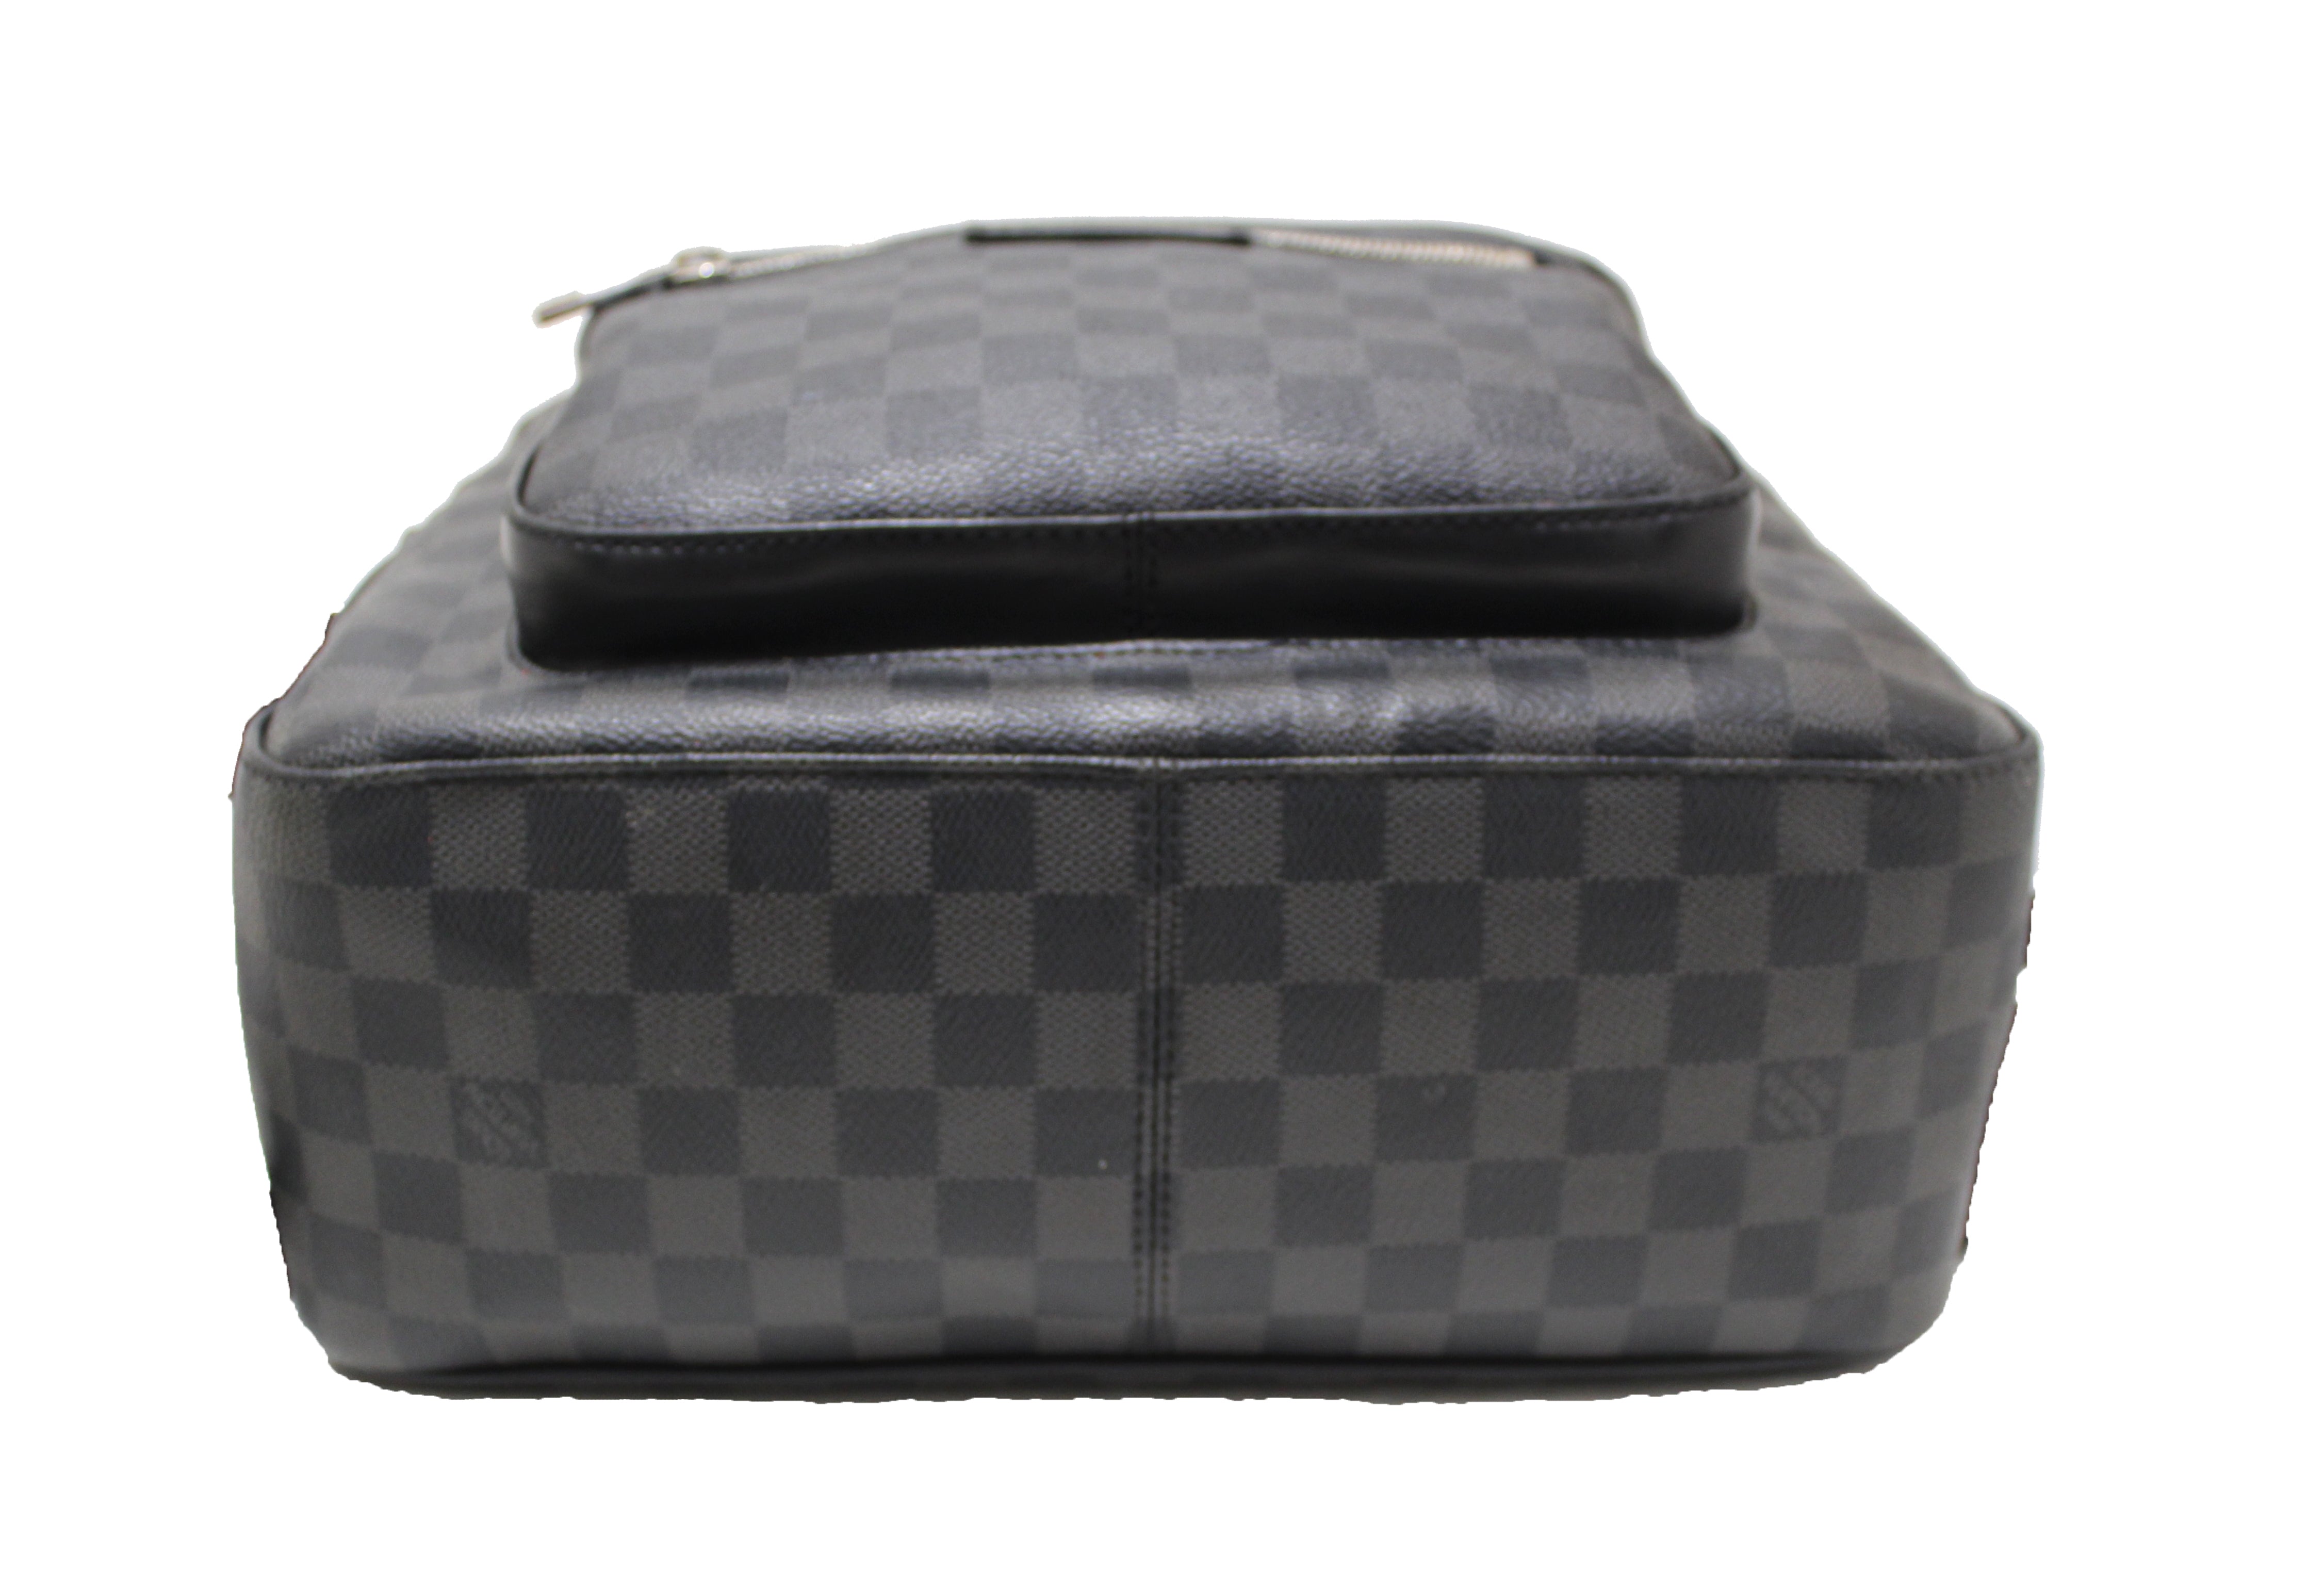 Authentic Louis Vuitton Backpack in Damier Graphite #0176940